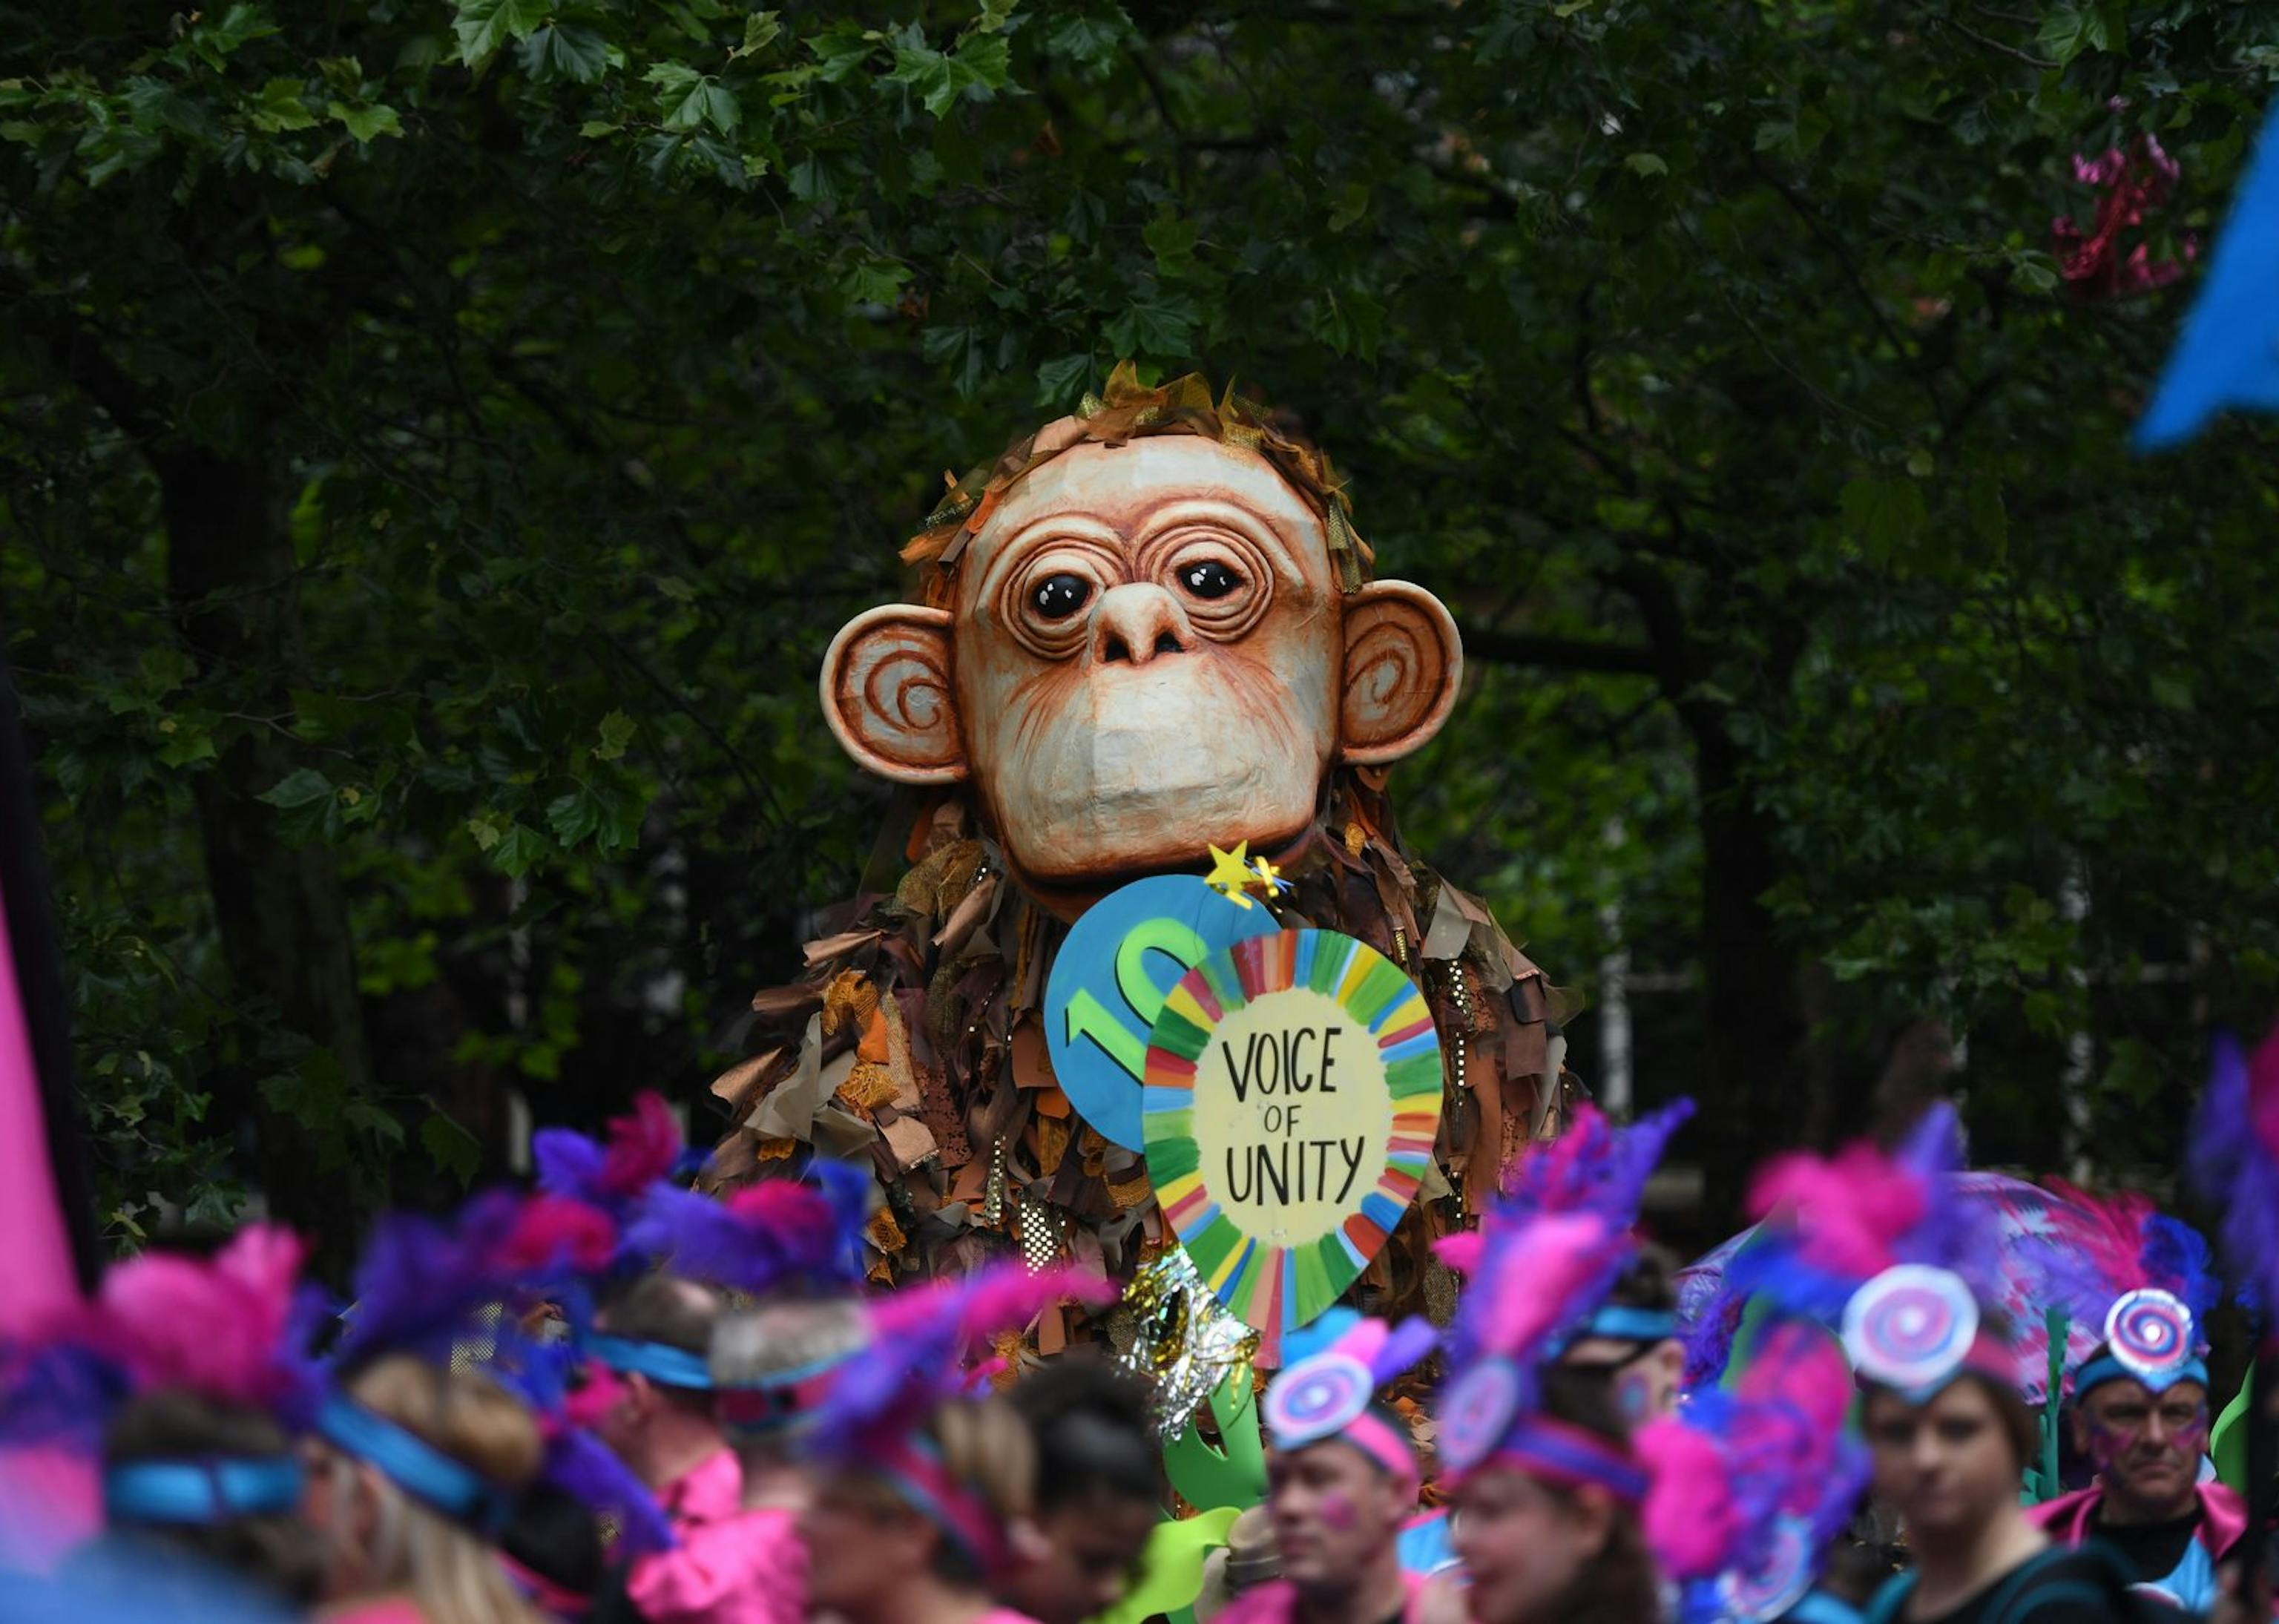 A giant puppet monkey with a paper mache face and a calico body in a crowded parade.